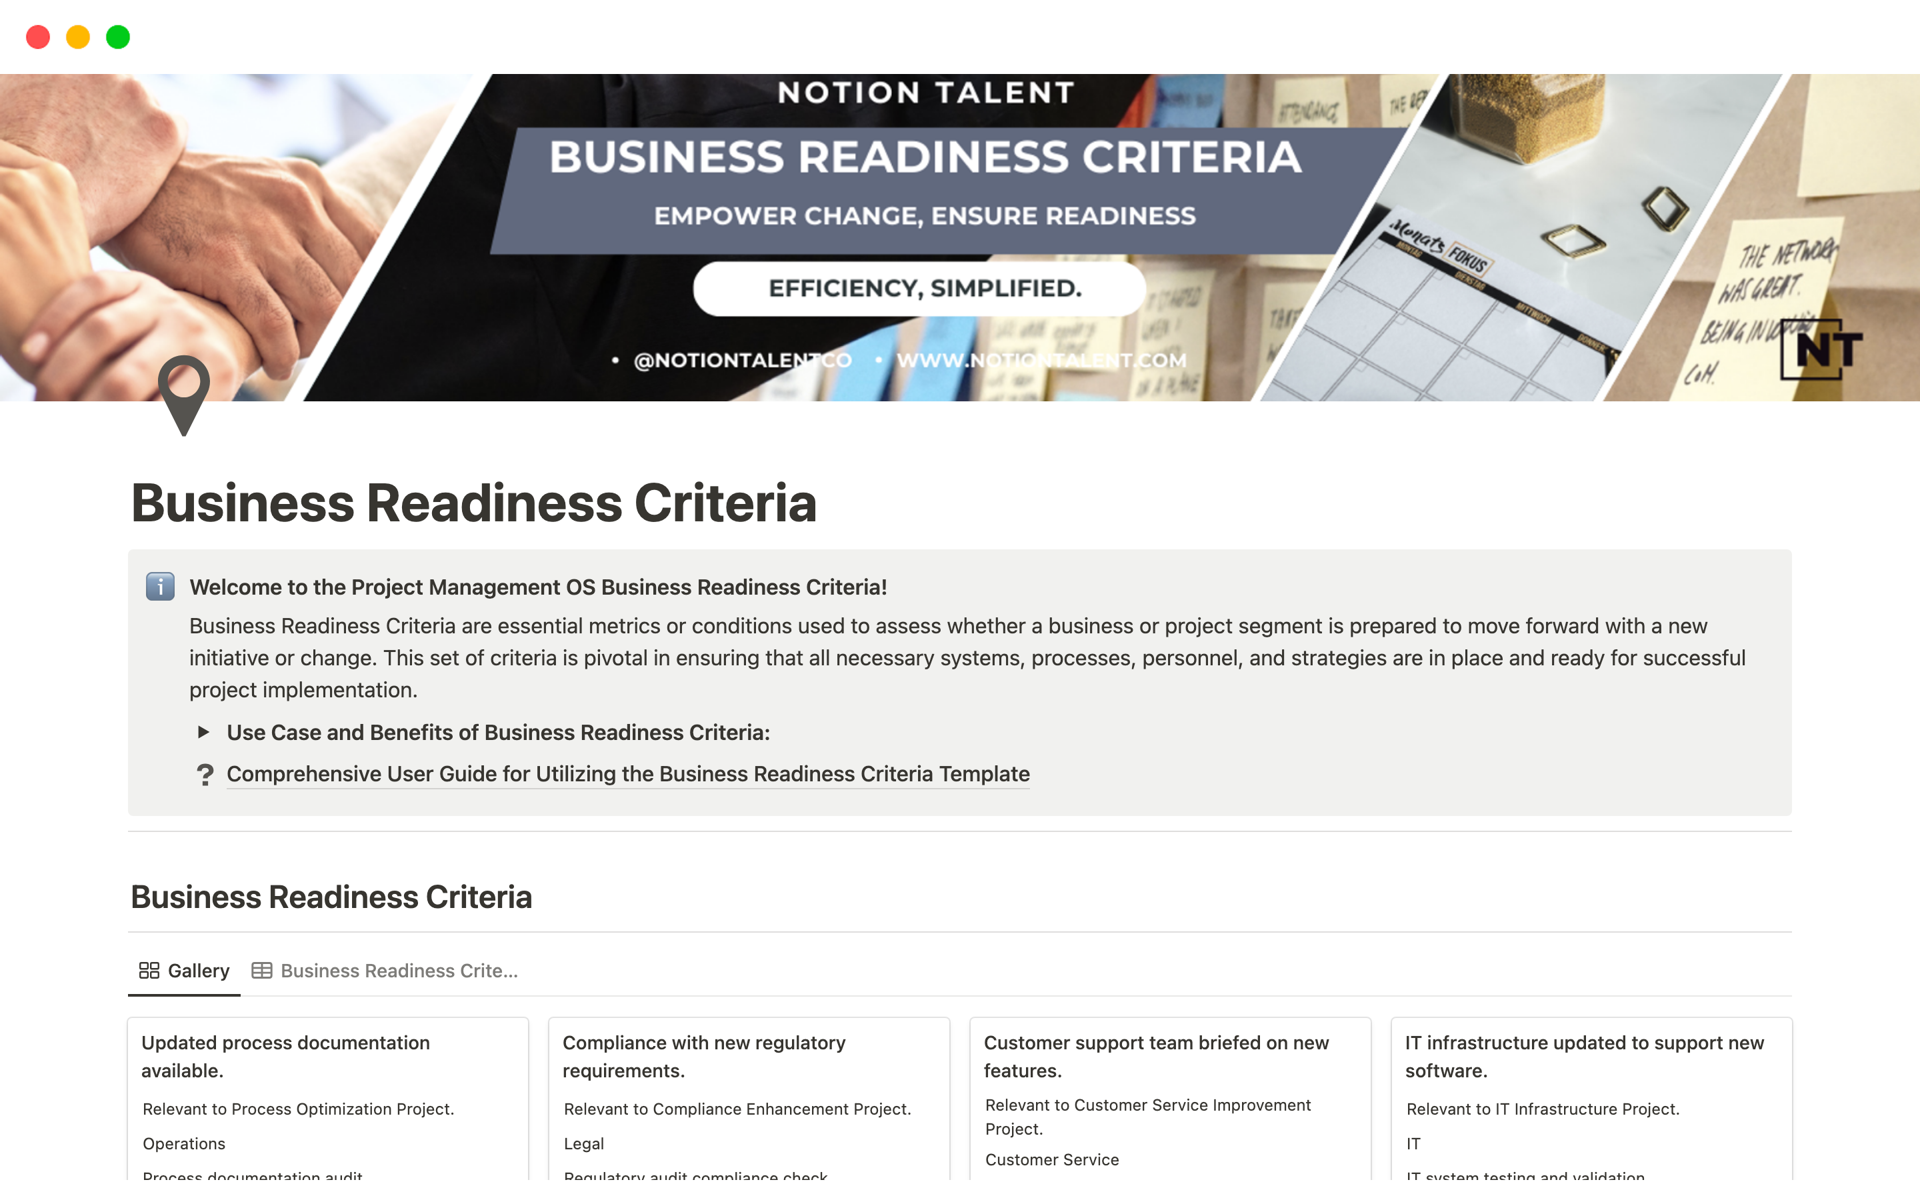 Ensure your project's success with the Notion Business Readiness Criteria Template, providing a structured approach to evaluate and prepare for upcoming project launches. This template is essential for assessing readiness and addressing any gaps before deployment.